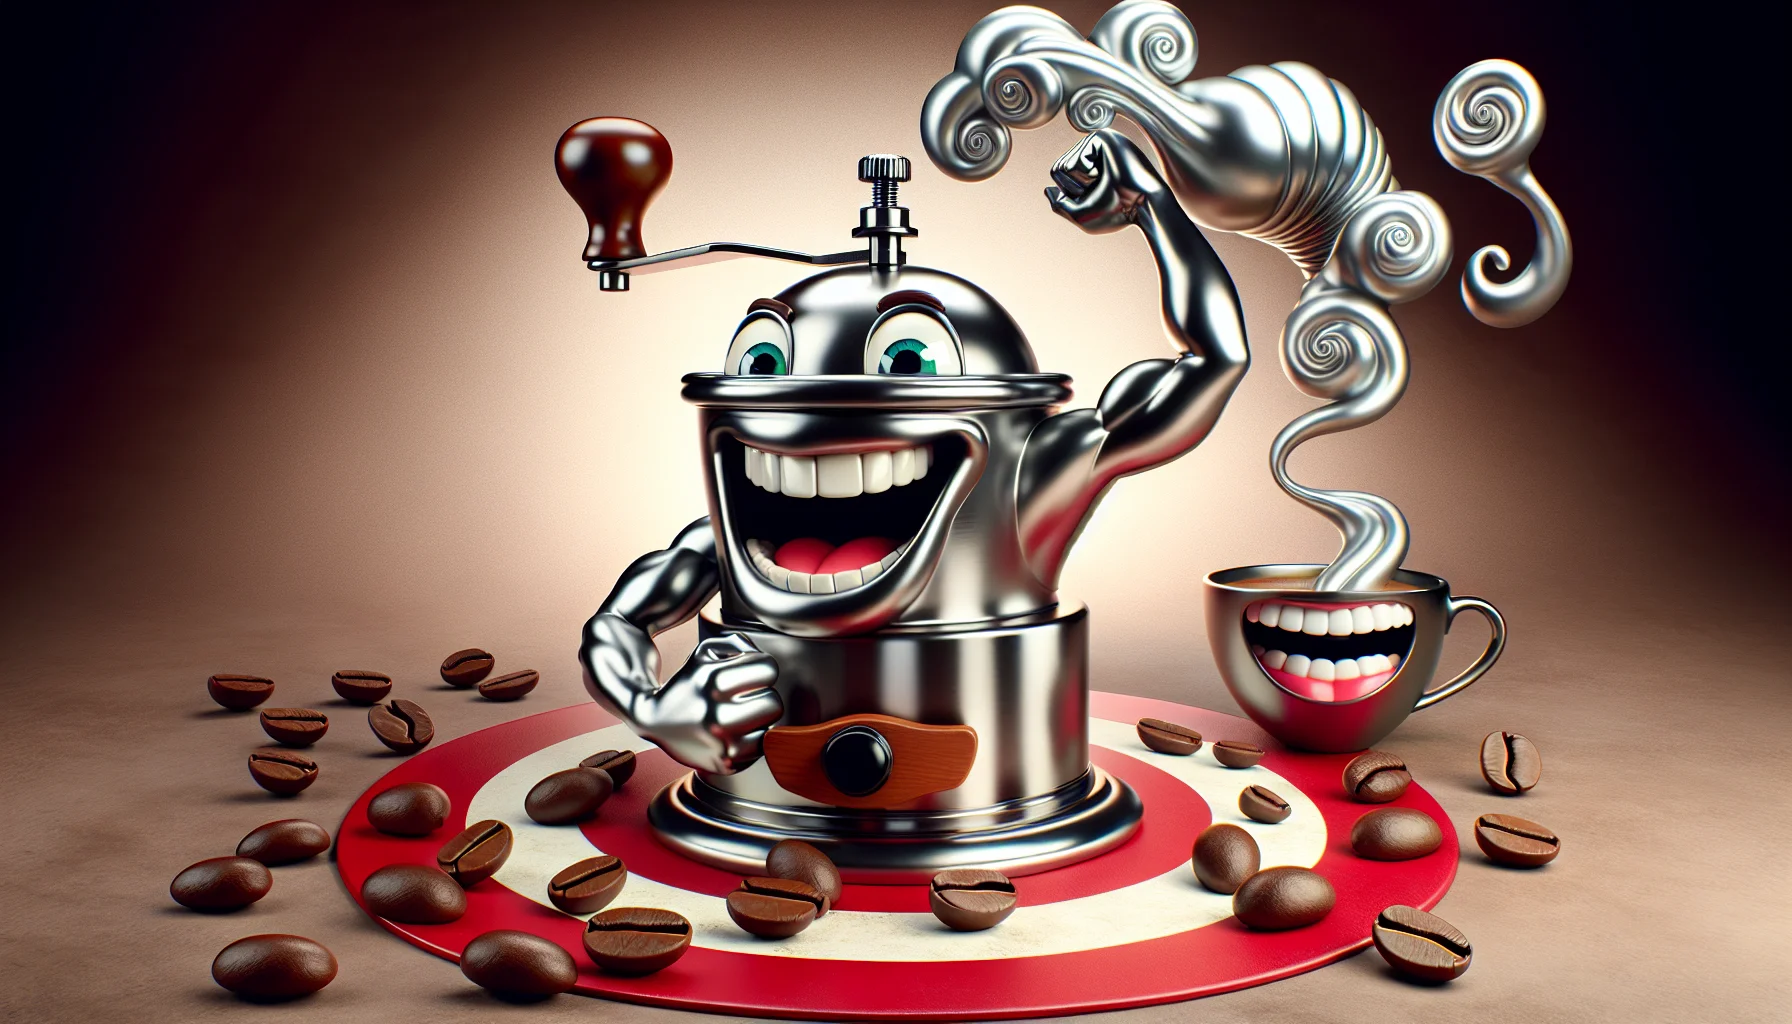 Imagine a realistic scenario featuring a shiny metallic coffee grinder seductively posing on a red bullseye target. This eccentric coffee grinder has anthropomorphic features, like flexed cartoonish arms showing its strength, and a bright, wide smile oozing confidence. Surrounding the scene, there are laughing coffee beans enjoying the spectacle, their faces showing immense enjoyment. Intricate steam wafts from a nearby cup of freshly brewed coffee, forming playful curly patterns in the air. All elements are bathed in a warm, inviting light, enticing viewers to savor the joy of coffee.